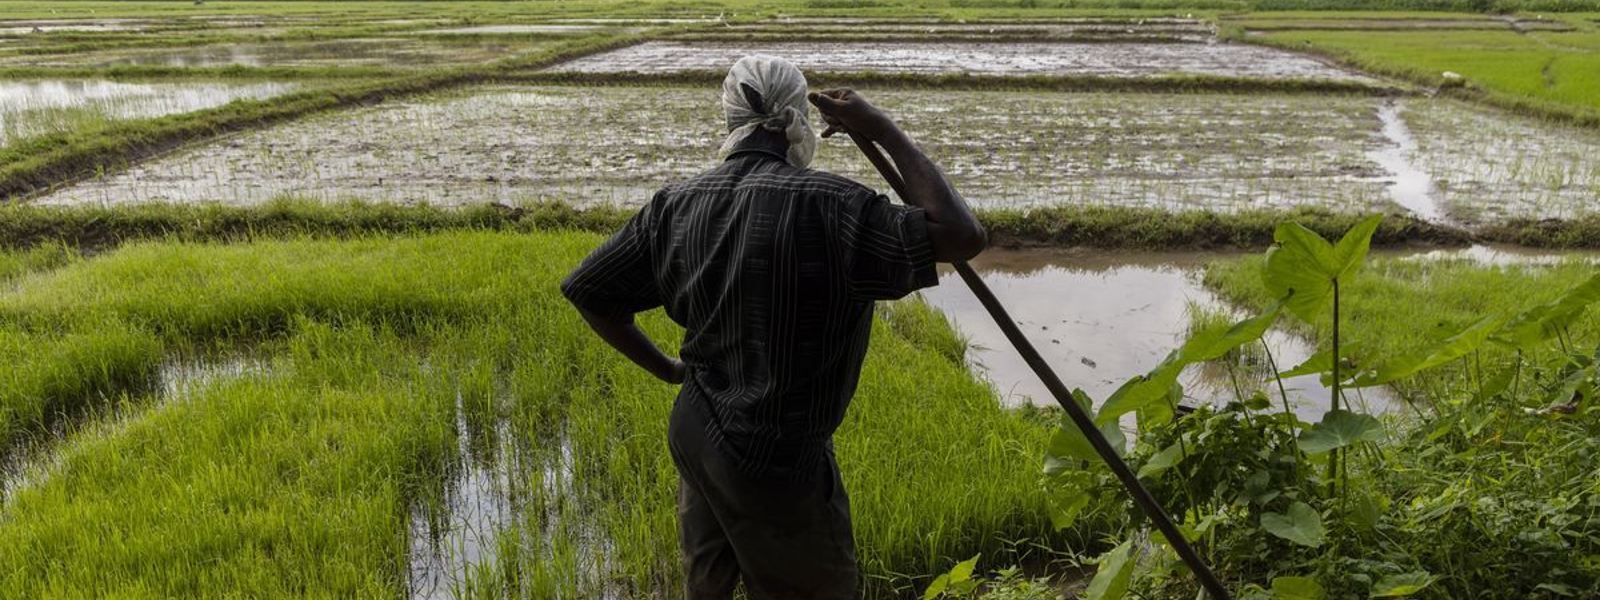 USAID to award Rs. 15,000/- allowance to low-income agriculture-base families